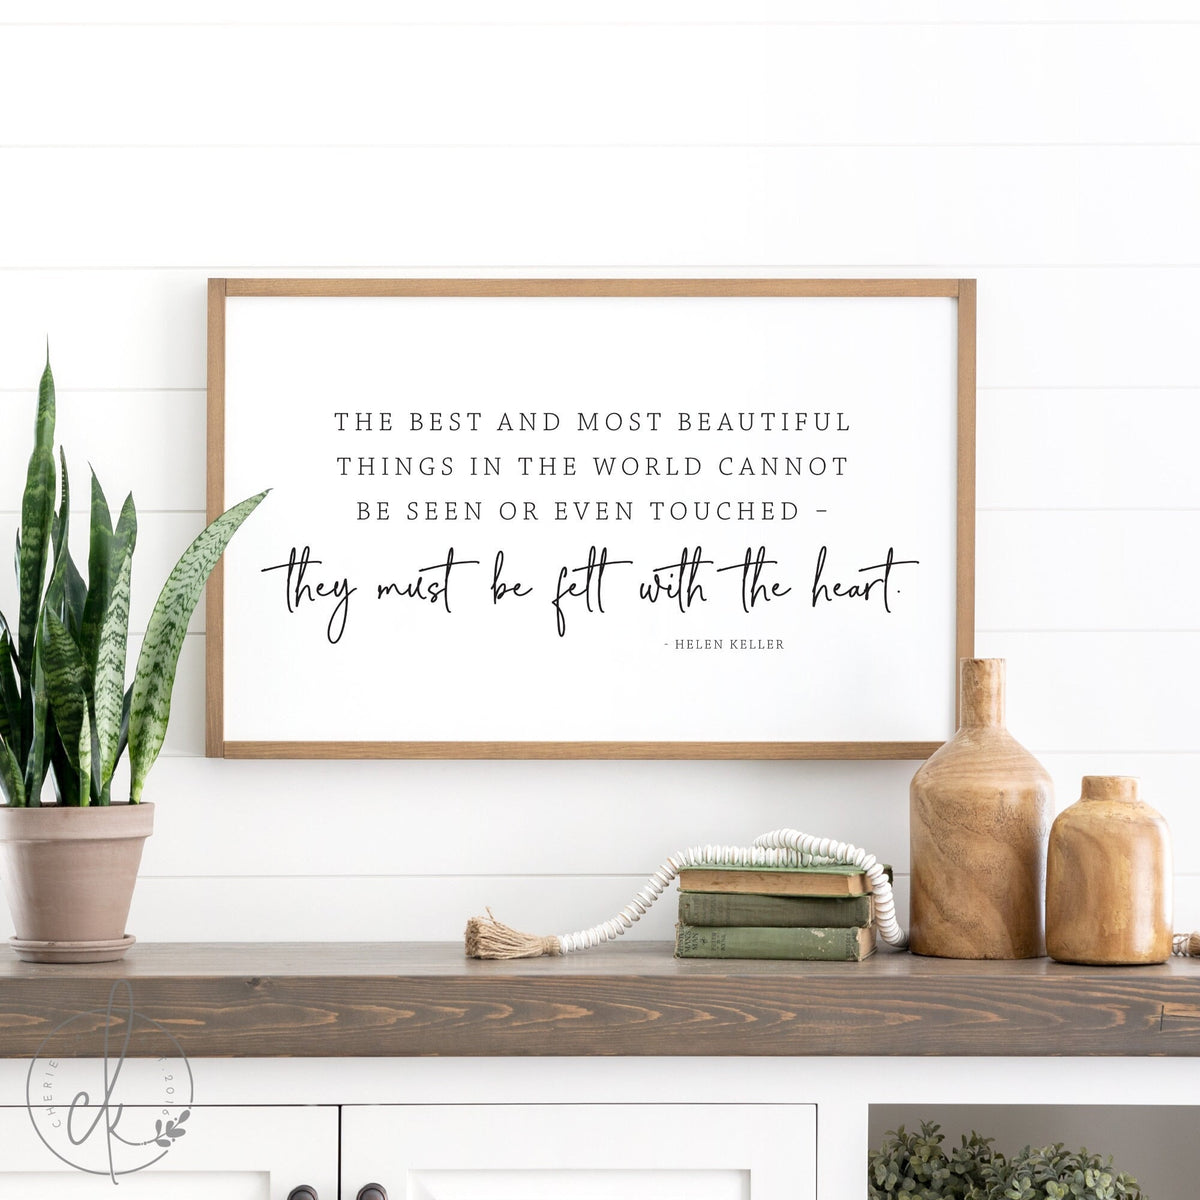 Inspirational sign | the best and most beautiful sign | Helen Keller quote | wood sign | inspirational wall art | wooden framed sign